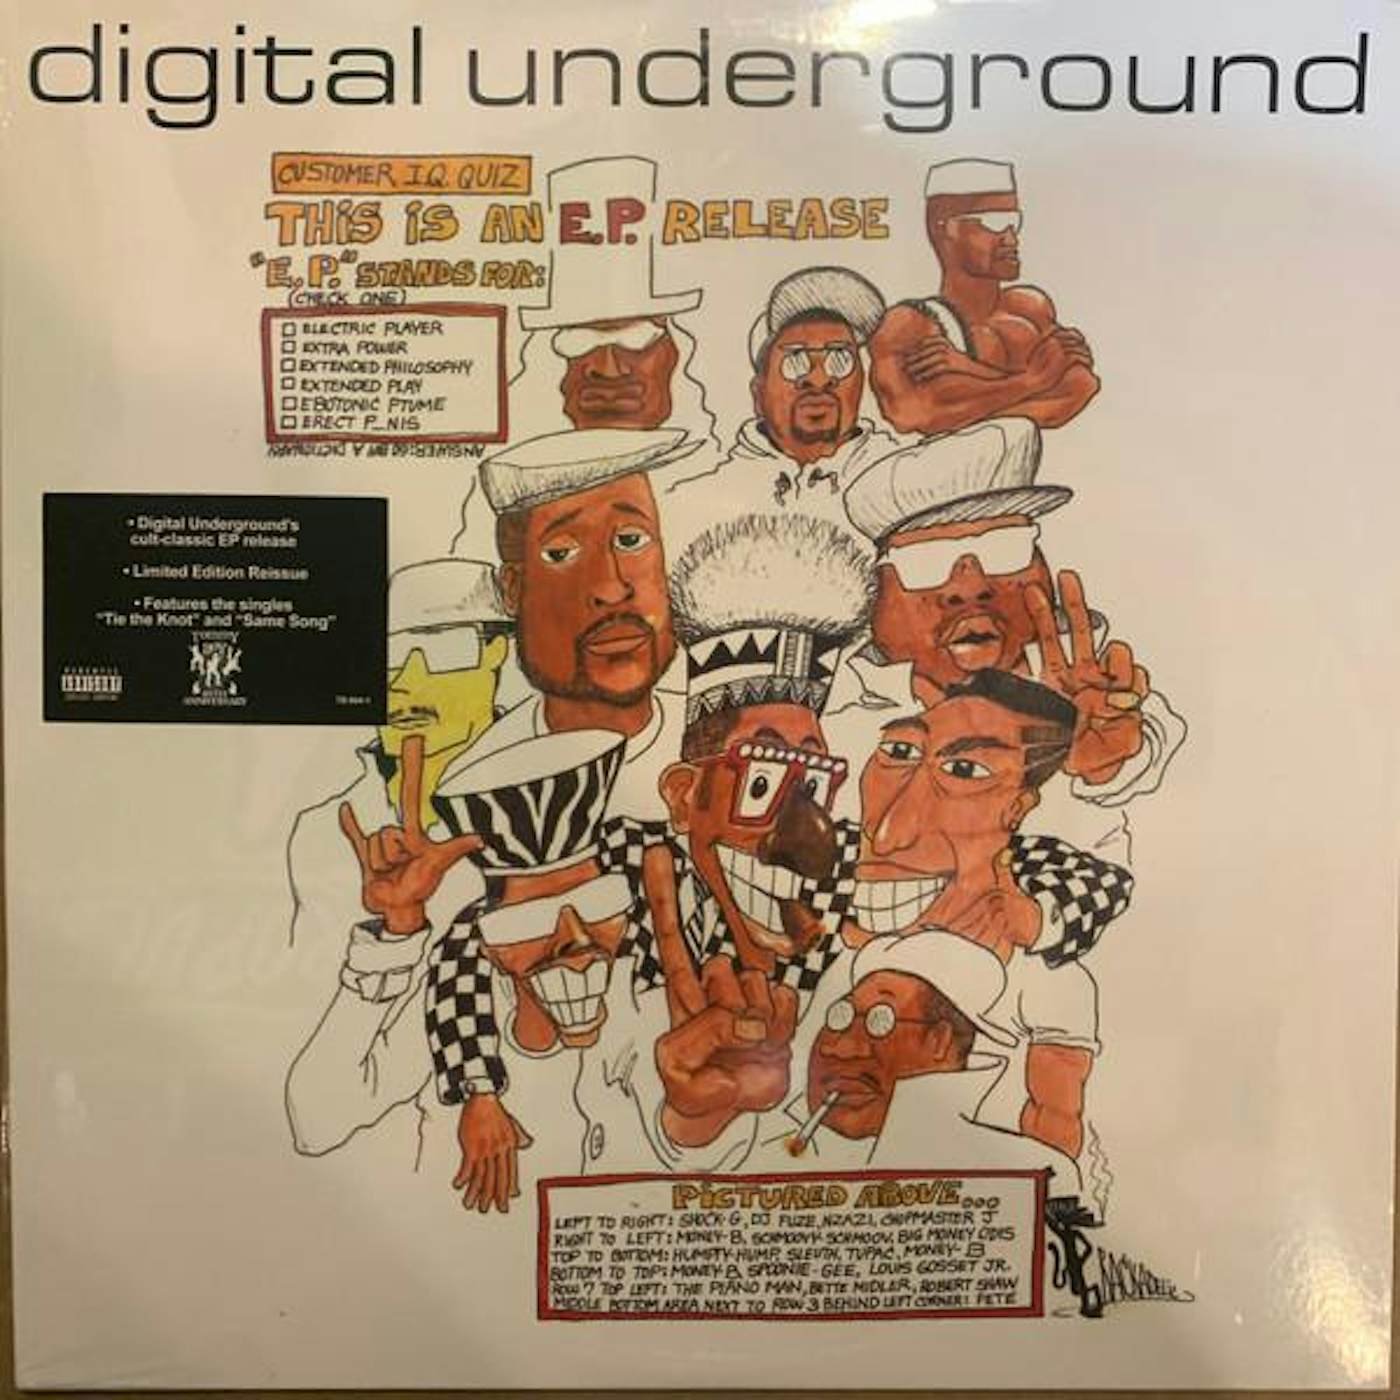 Digital Underground This is an E.P. Release Vinyl Record